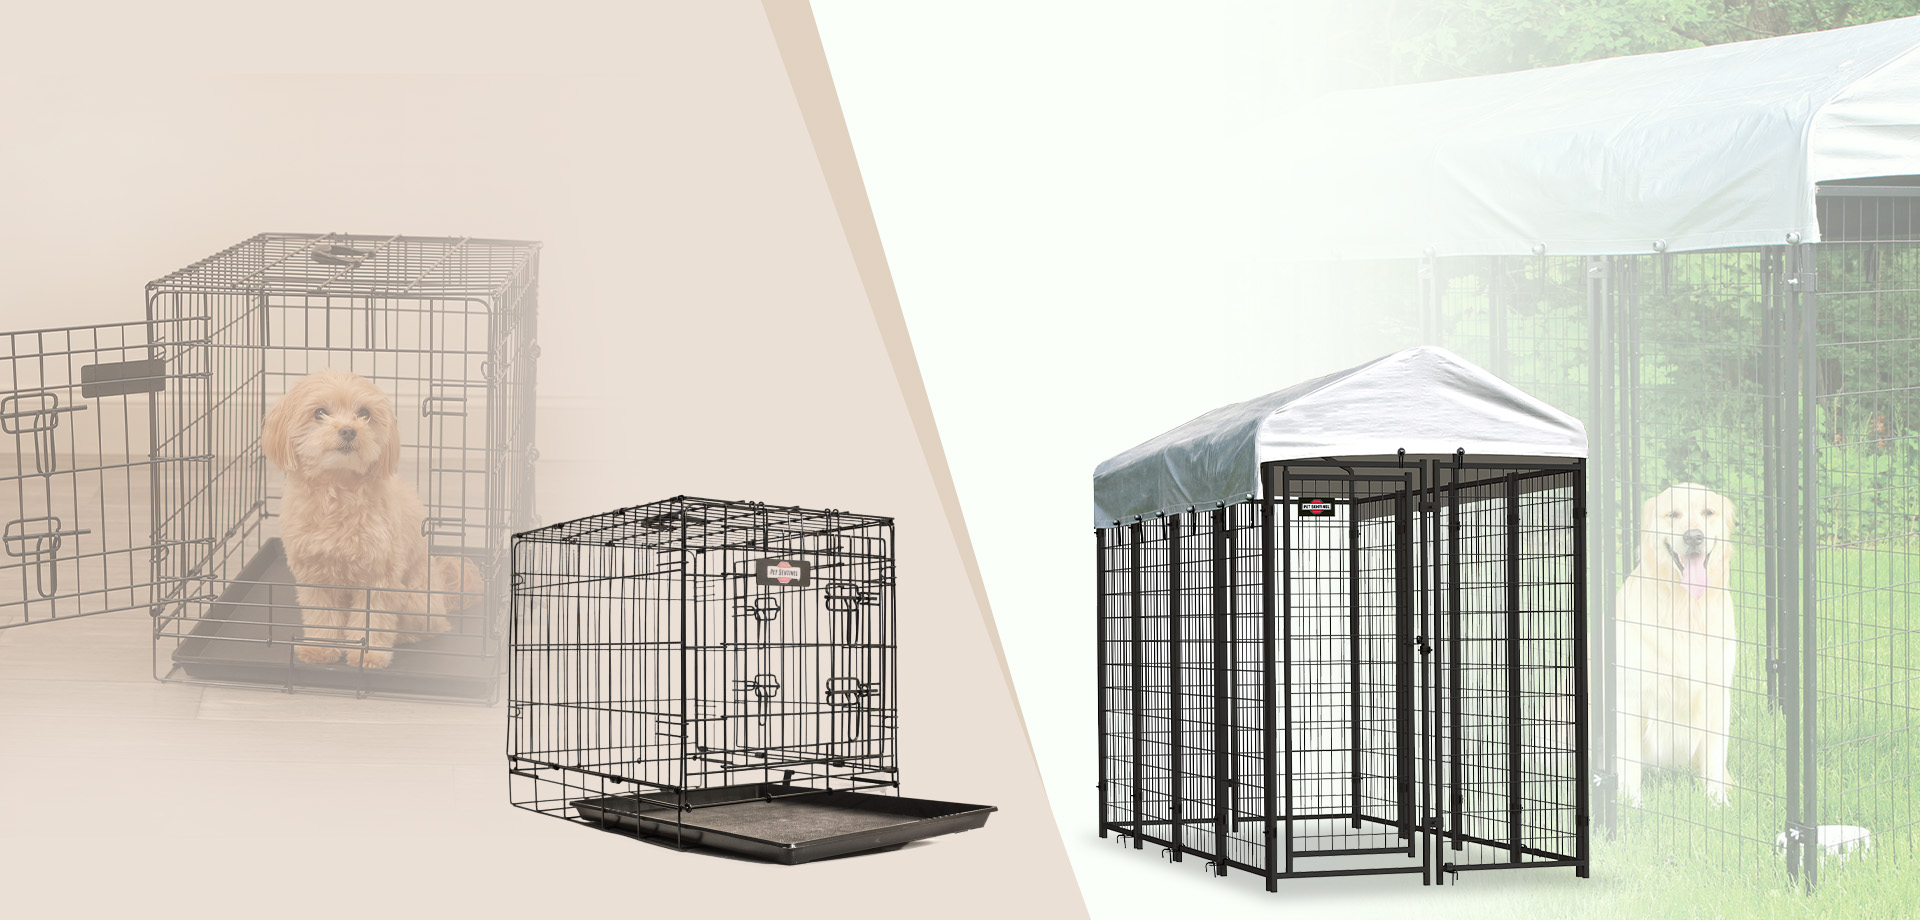 Pets Cage